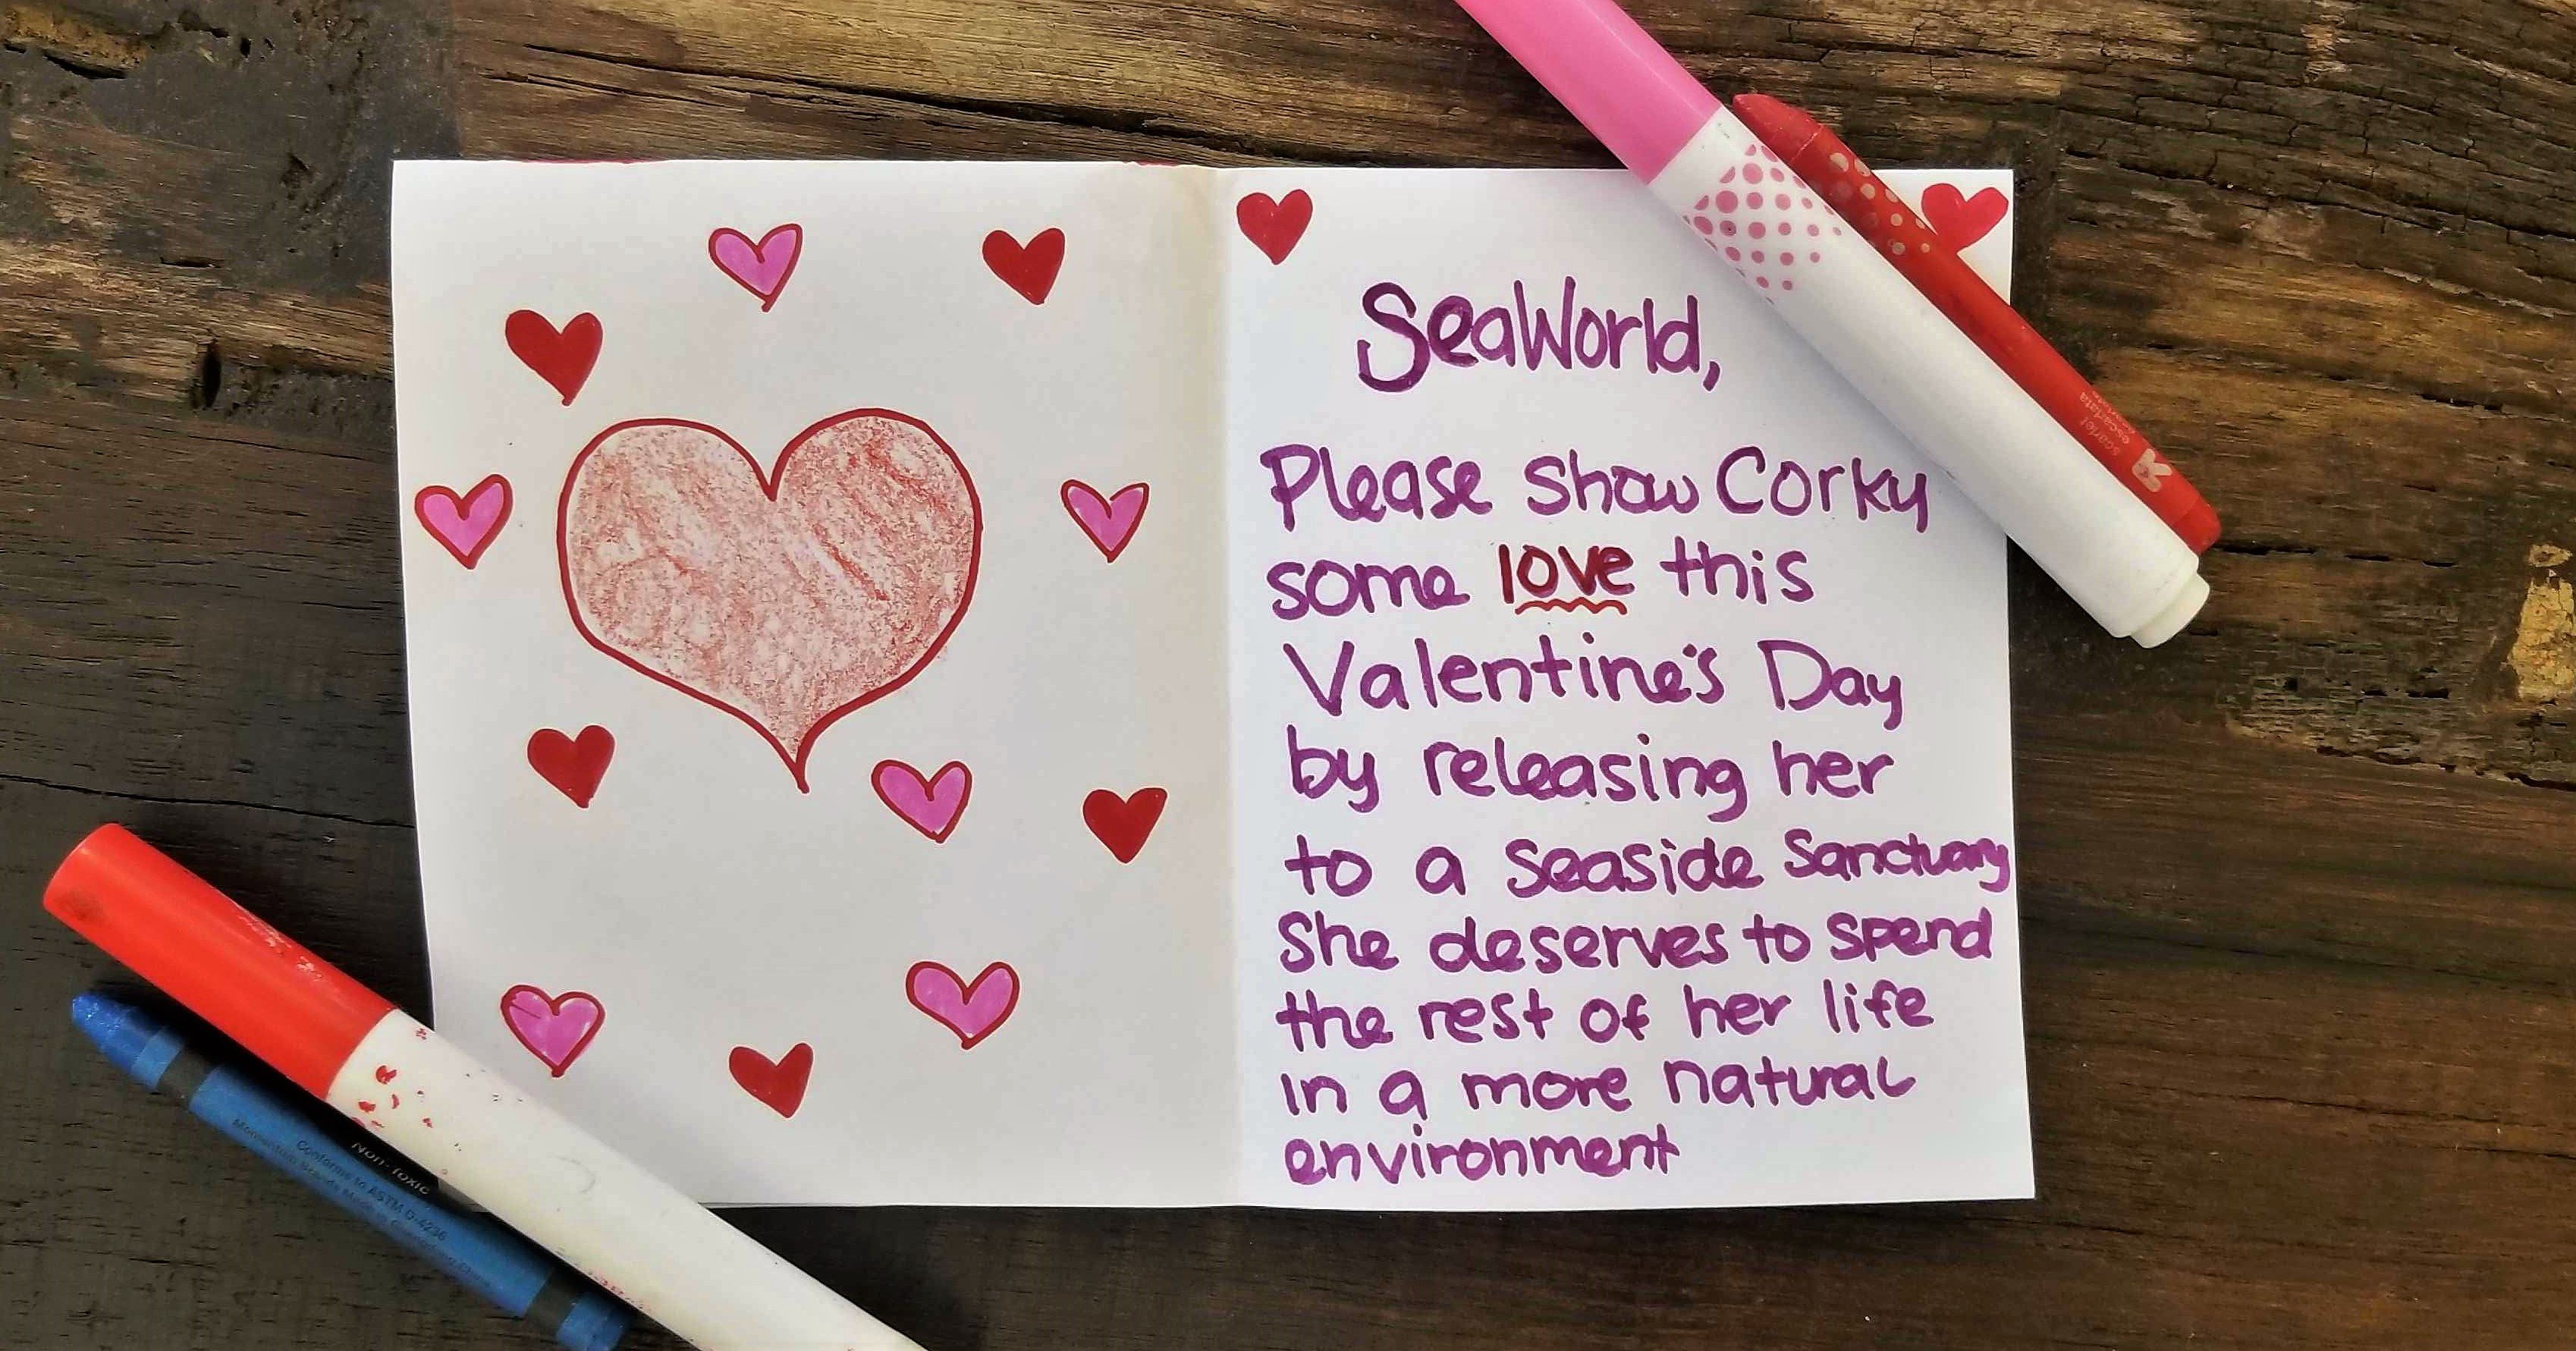 Show Love for Corky the Orca This Valentine's Day